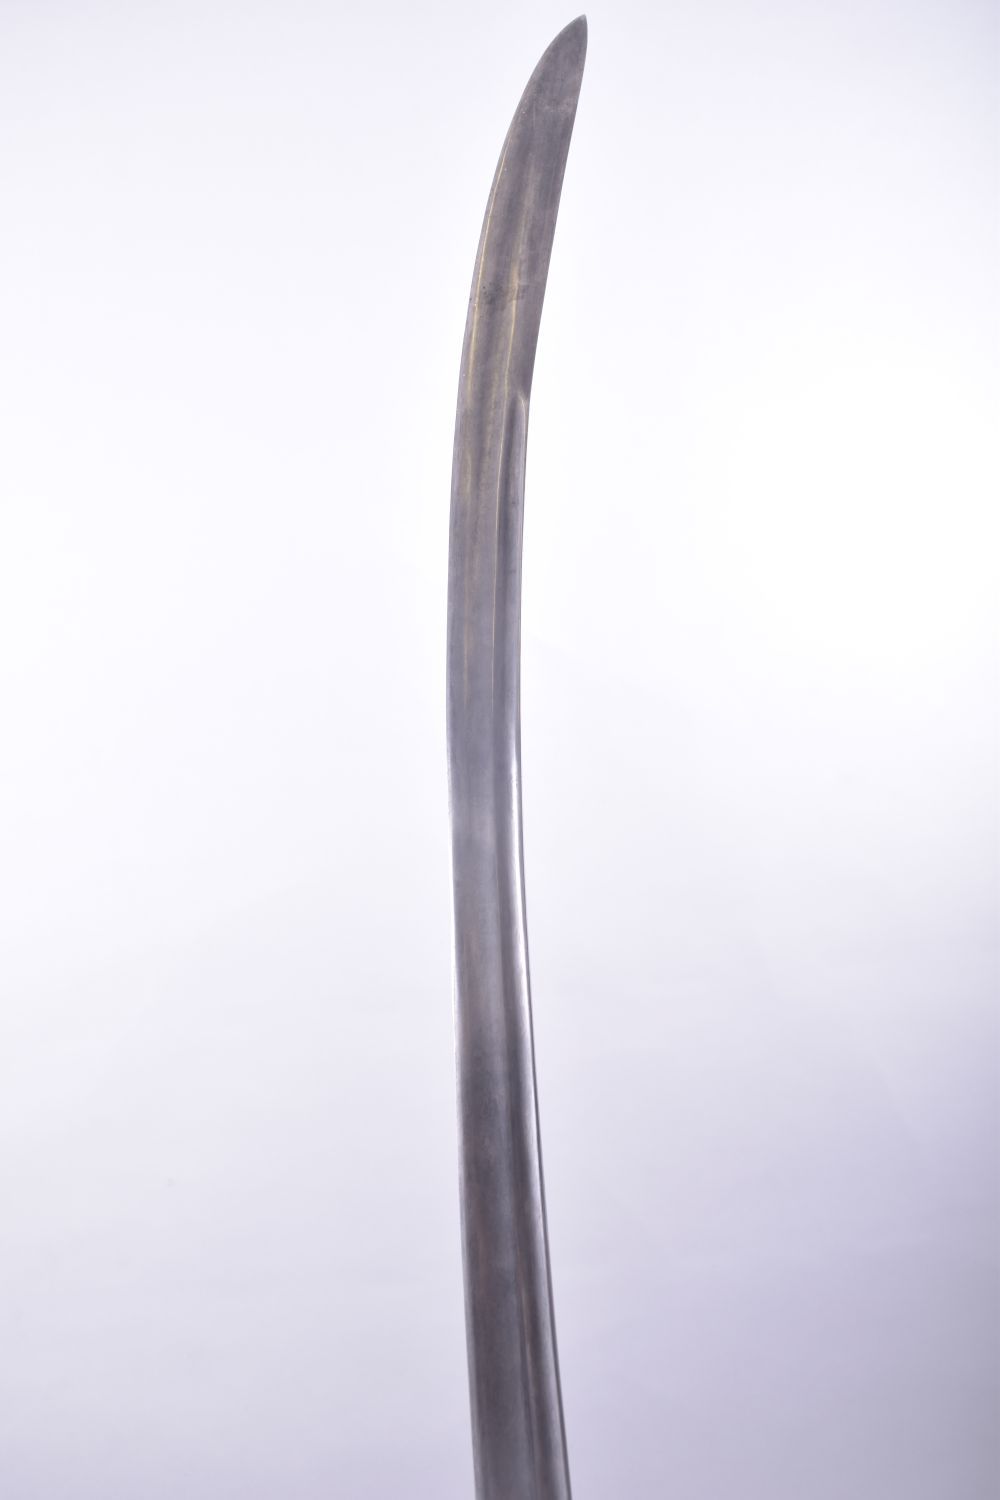 A FINE 18TH CENTURY INDIAN WATERED STEEL TULWAR SWORD, with silver inlaid handle, 88.5cm long. - Image 3 of 7